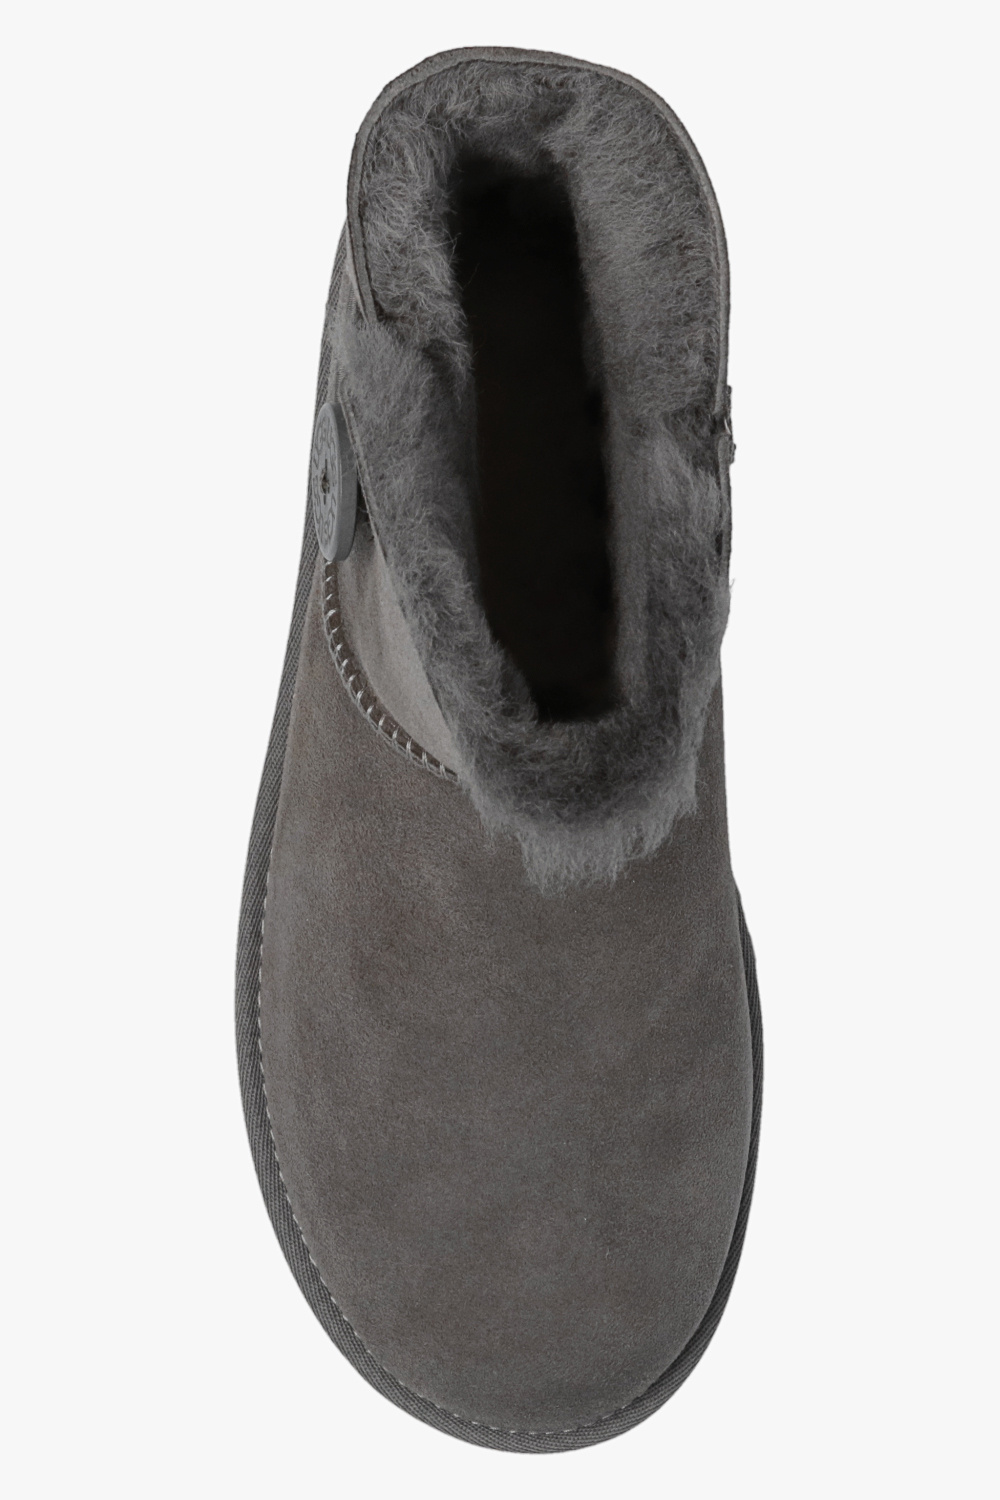 UGG ‘Bailey Button II’ snow boots